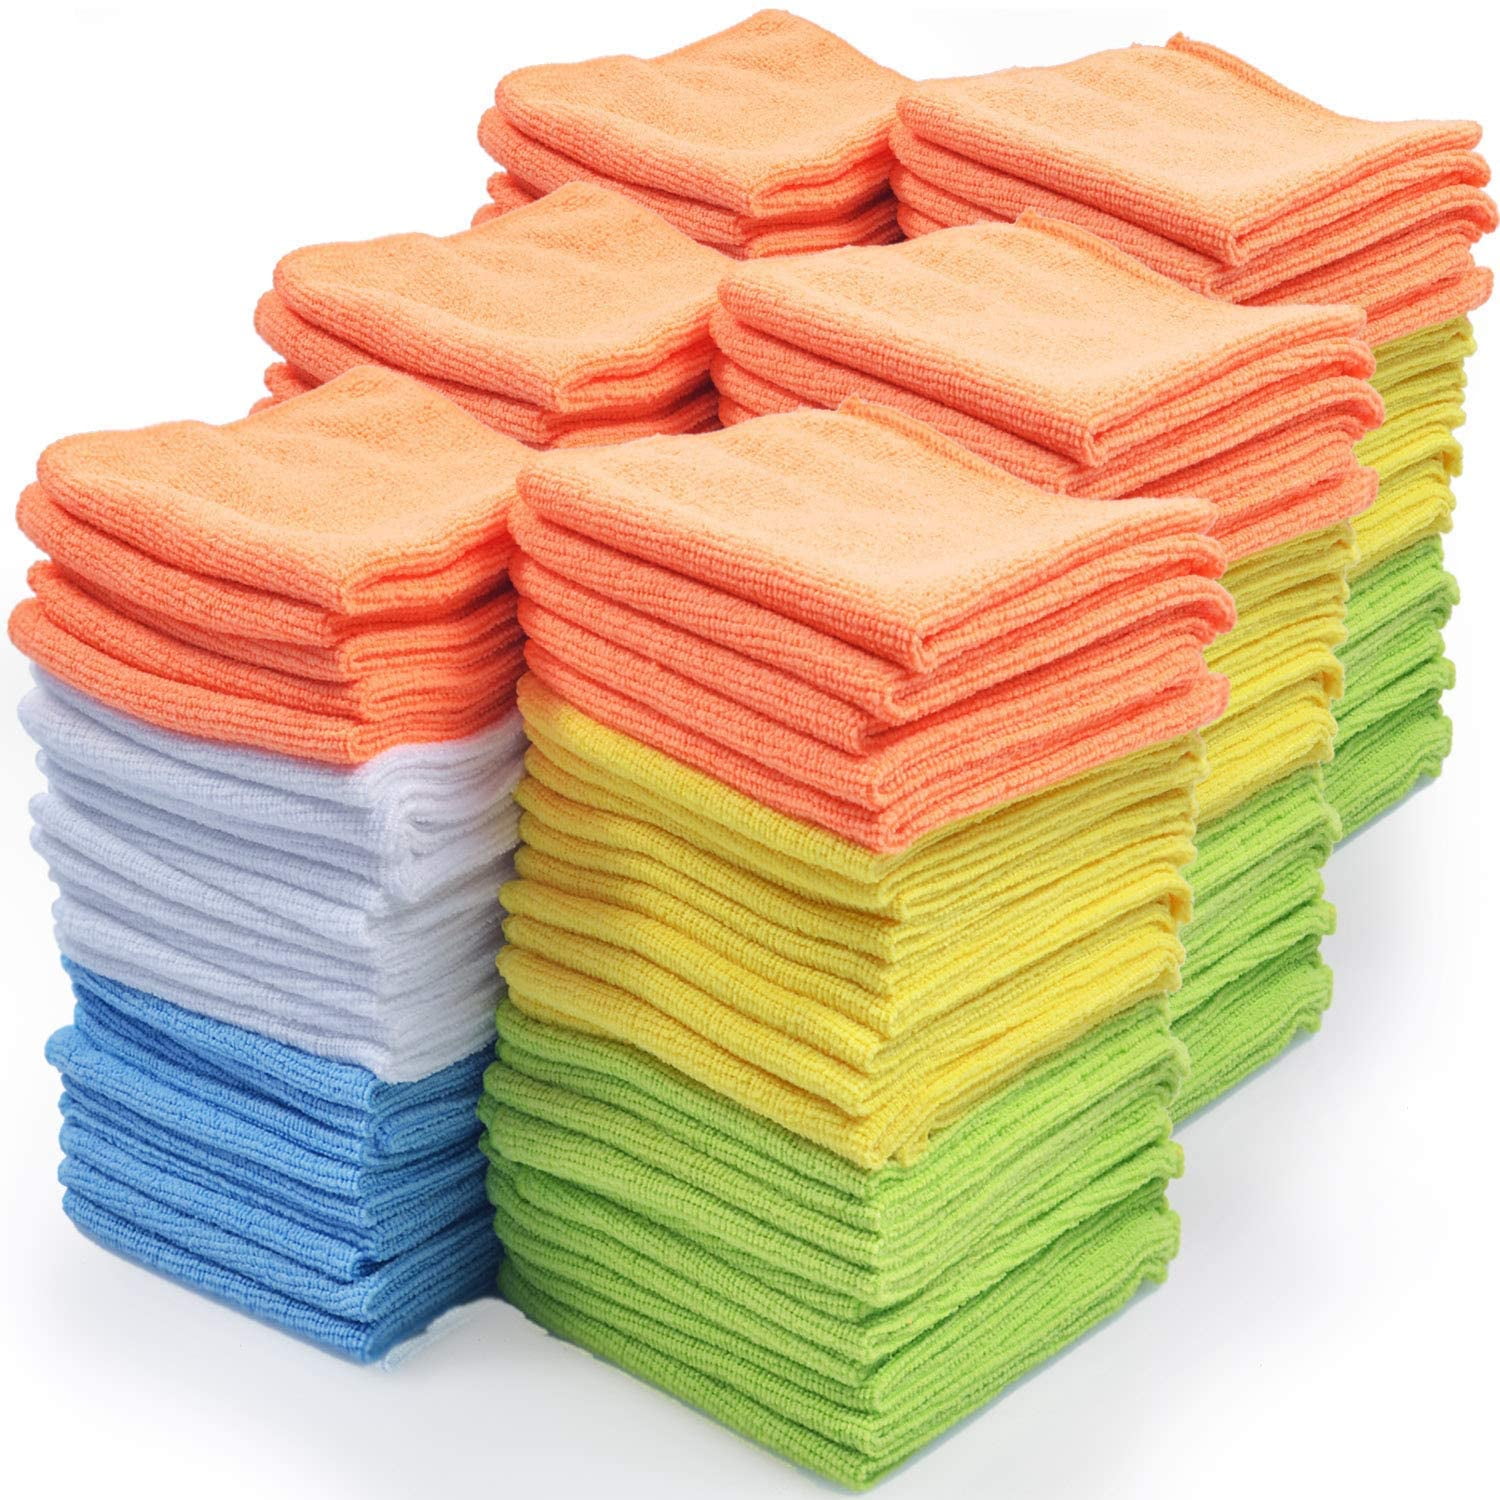 Highly Absorbent, Details about   Microfiber Cleaning Cloths 8 pcs 30x40cms 280GSM Multi-Color 